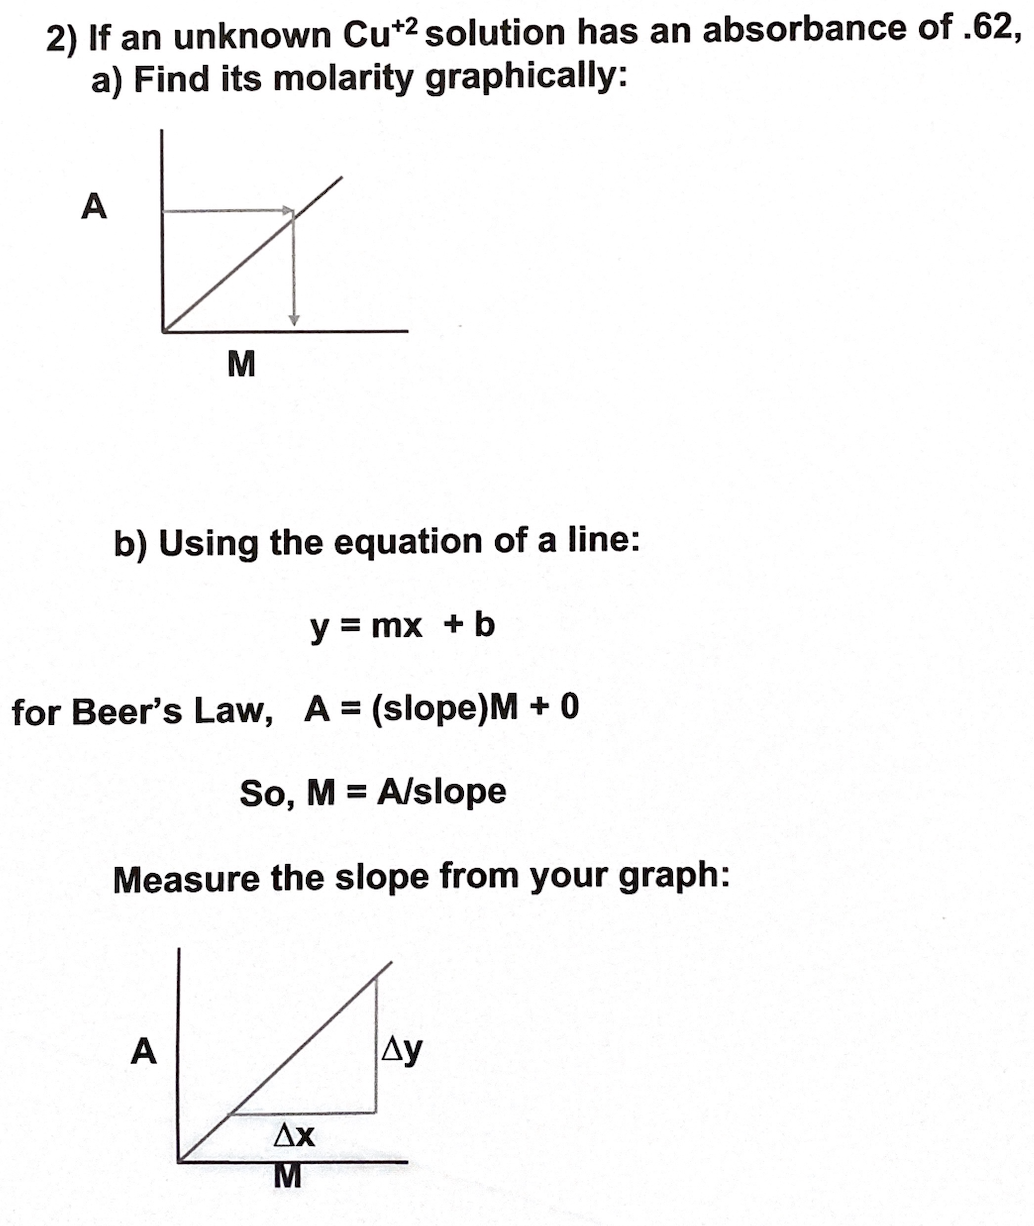 2) If an unknown Cu*2 solution has an absorbance of .62,
a) Find its molarity graphically:
A
M
b) Using the equation of a line:
y = mx + b
for Beer's Law, A = (slope)M + 0
So, M = A/slope
Measure the slope from your graph:
A
Ay
Ax
M
